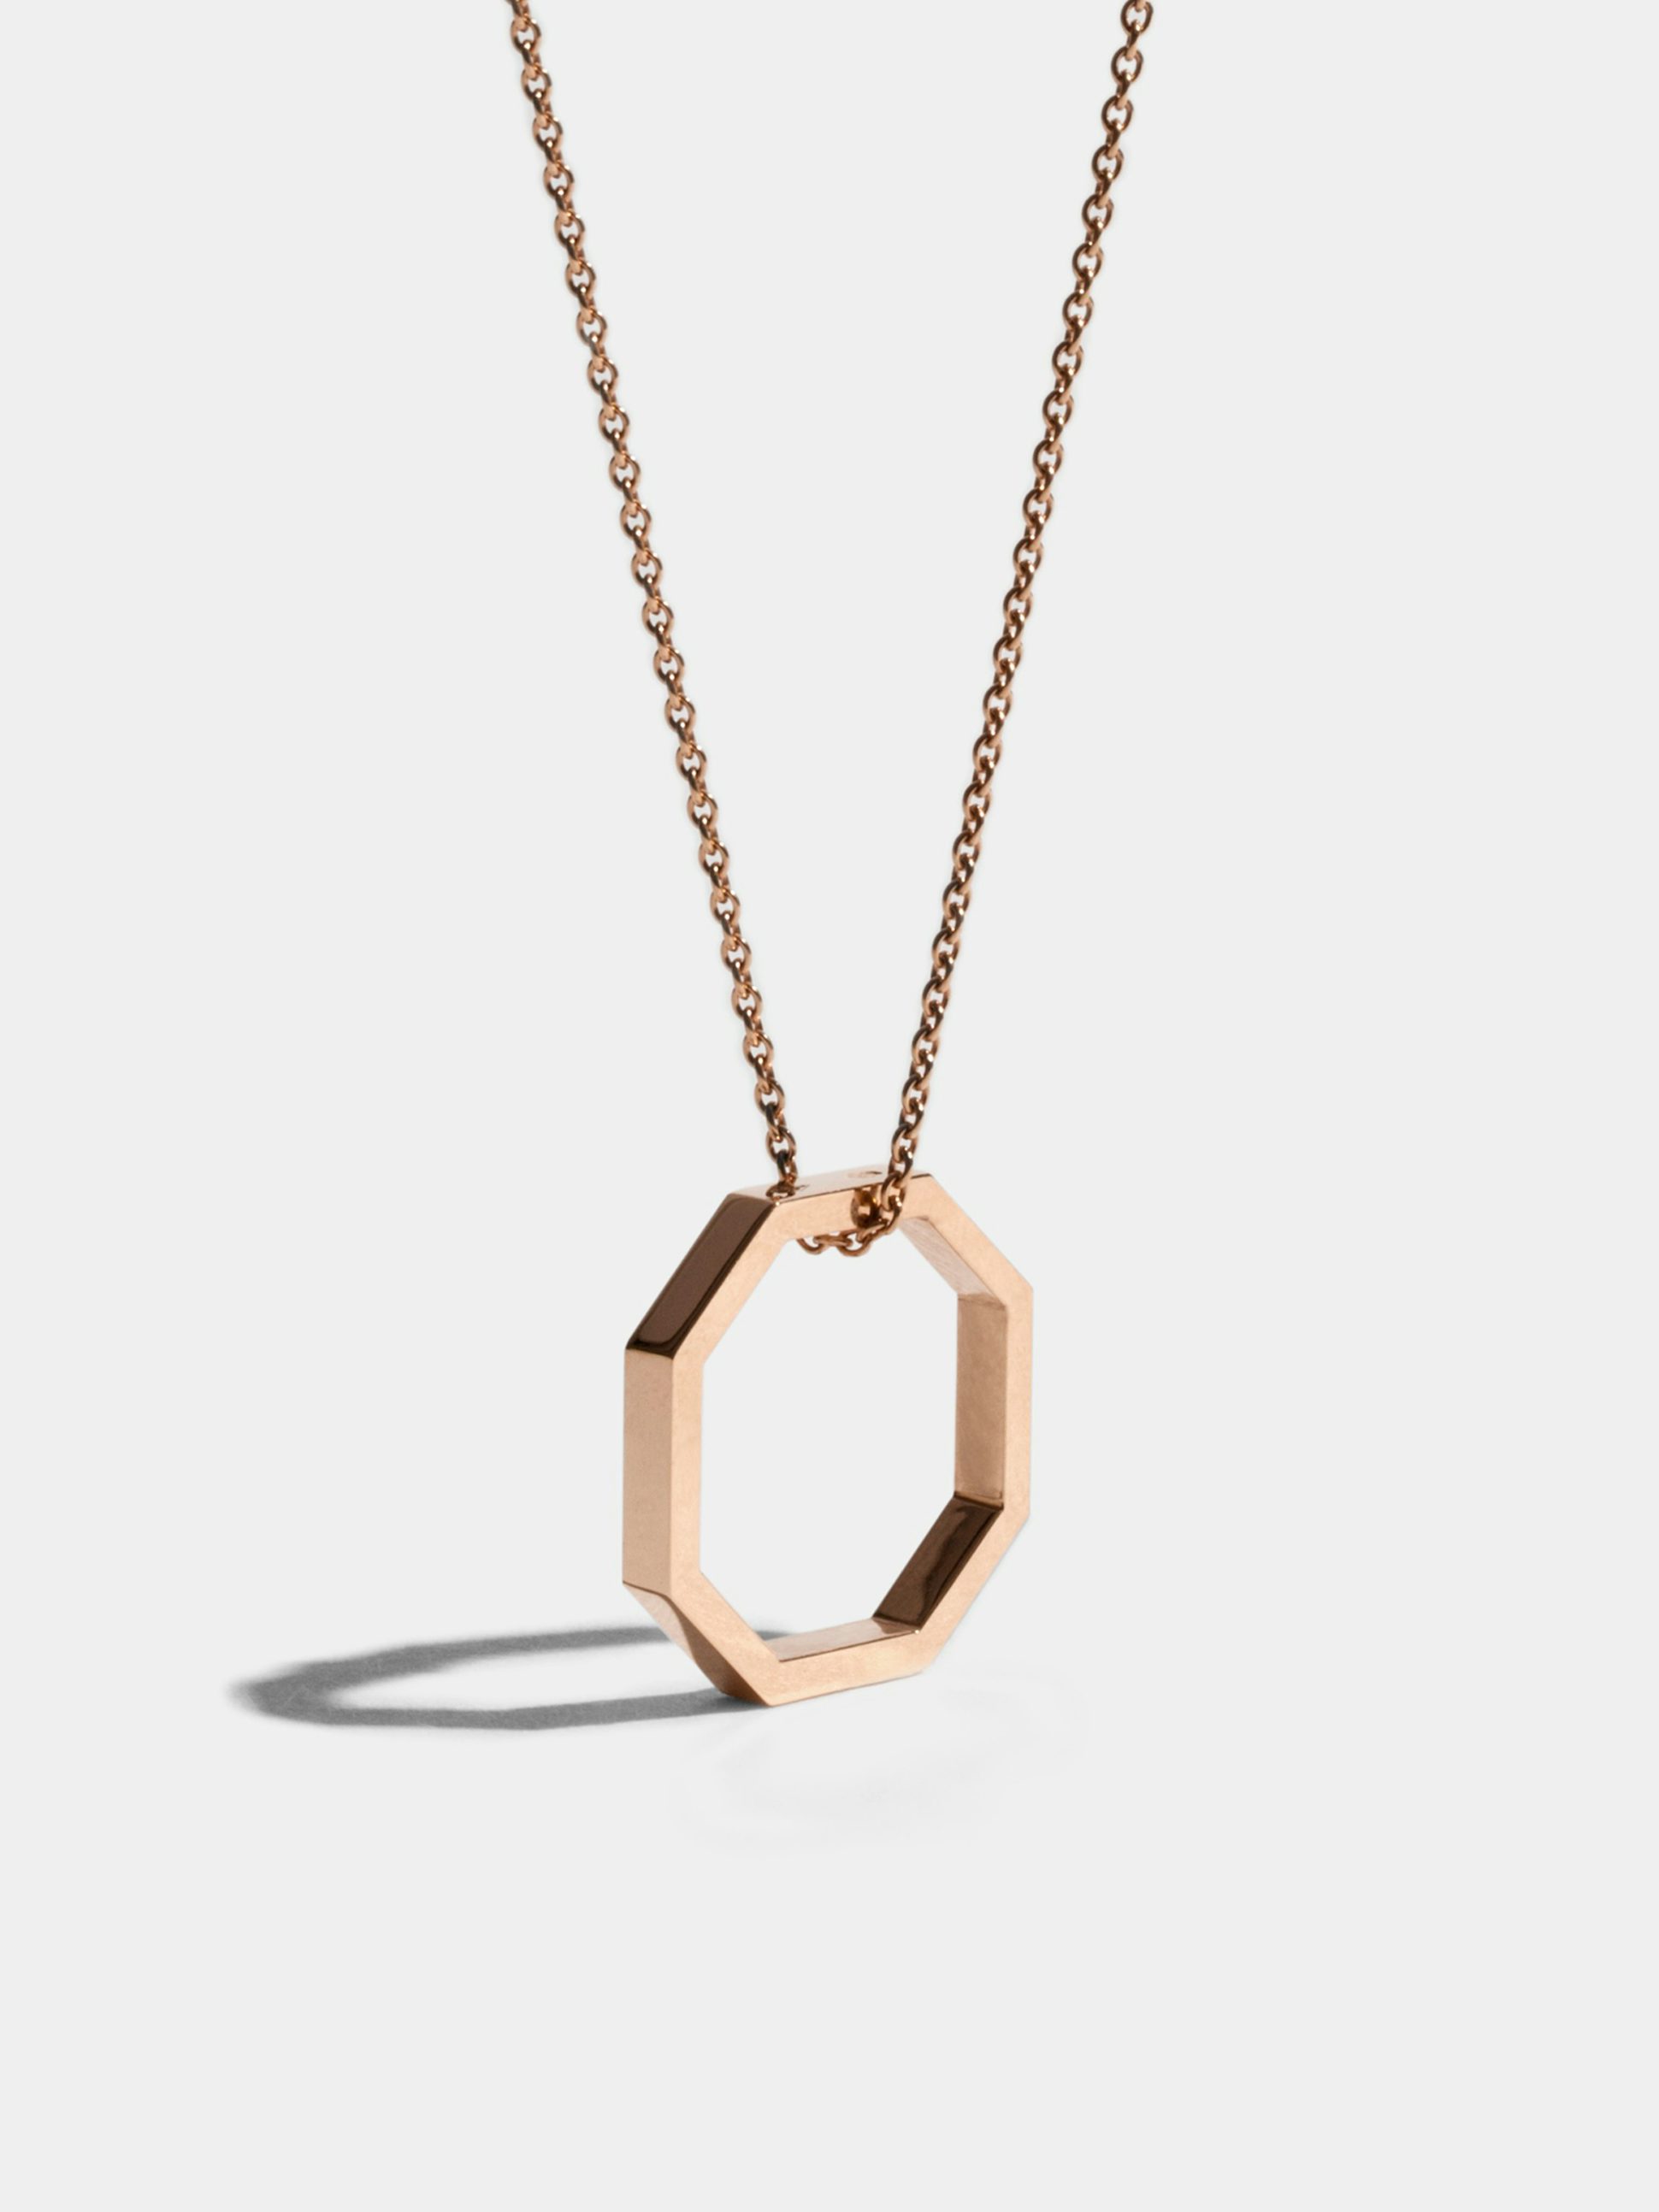 Octogone necklace with a 18mm pendant in 18k Fairmined ethical rose gold, on a 88cm chain.